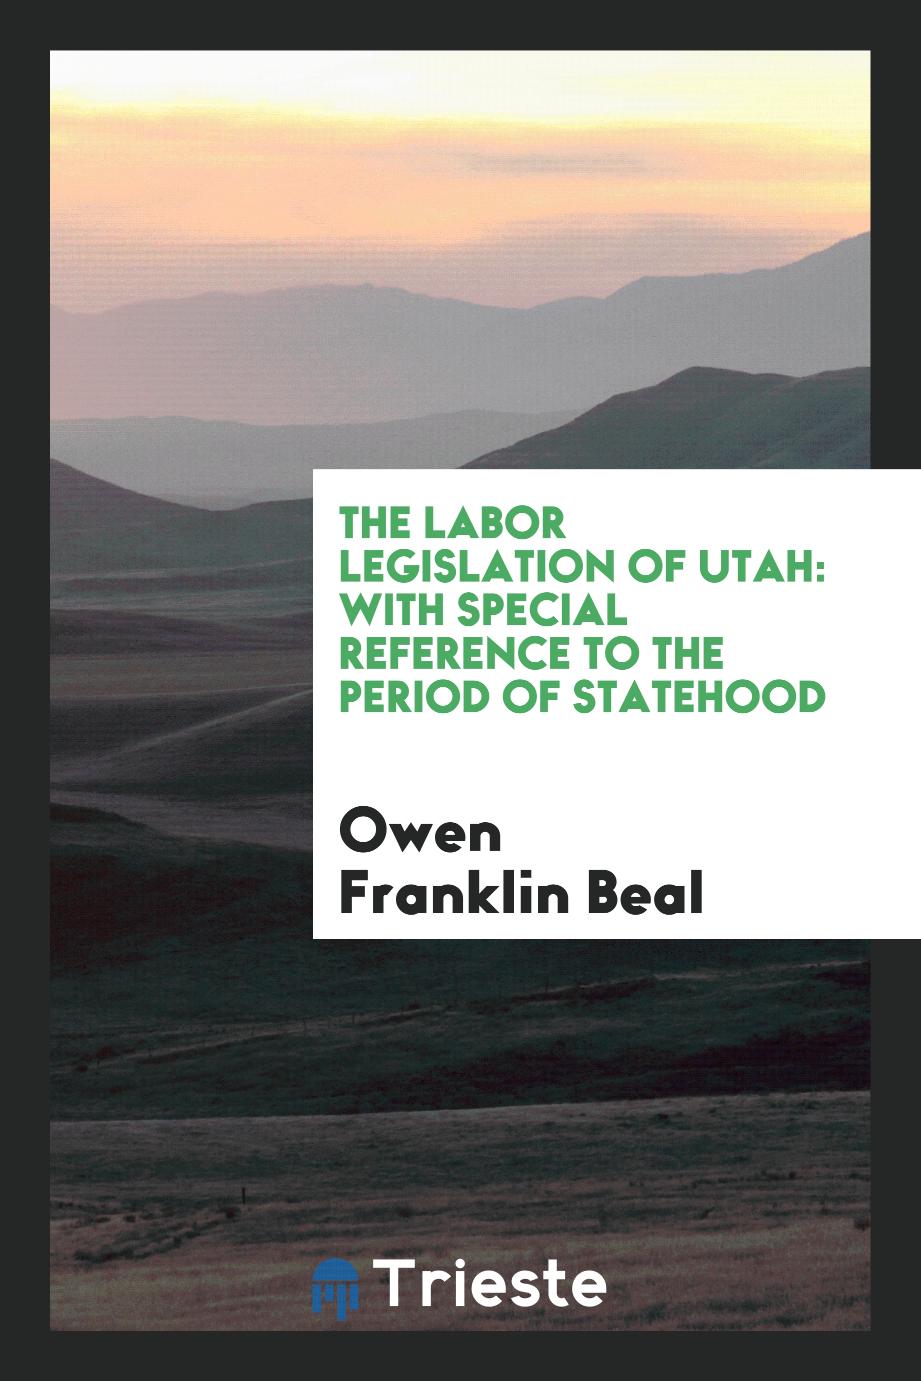 The Labor Legislation of Utah: With Special Reference to the Period of Statehood